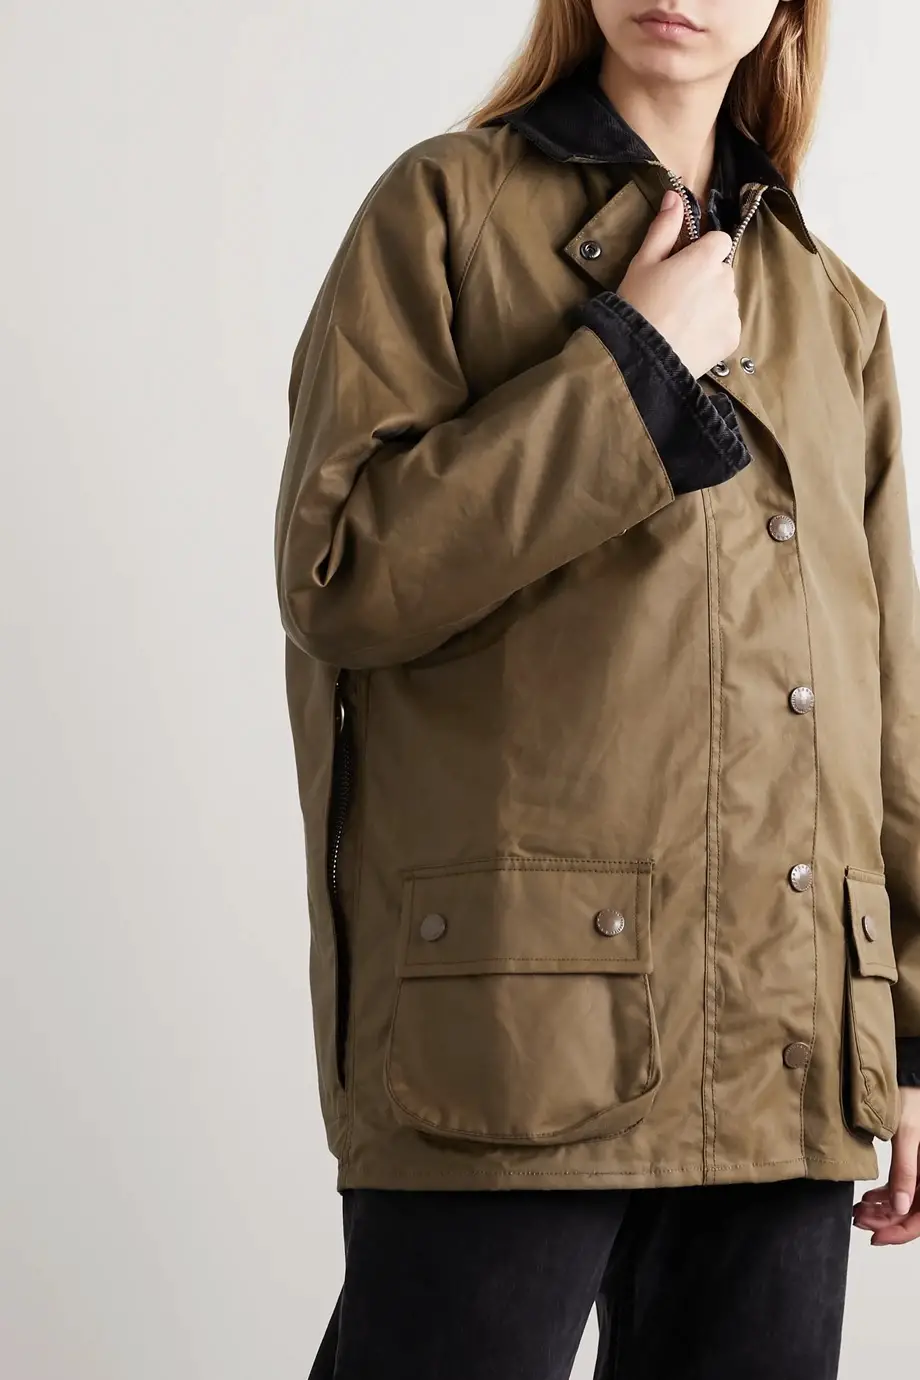 The Duchess of Cambridge wore Barbour by Alexa Chung Edith Jacket in a video clip